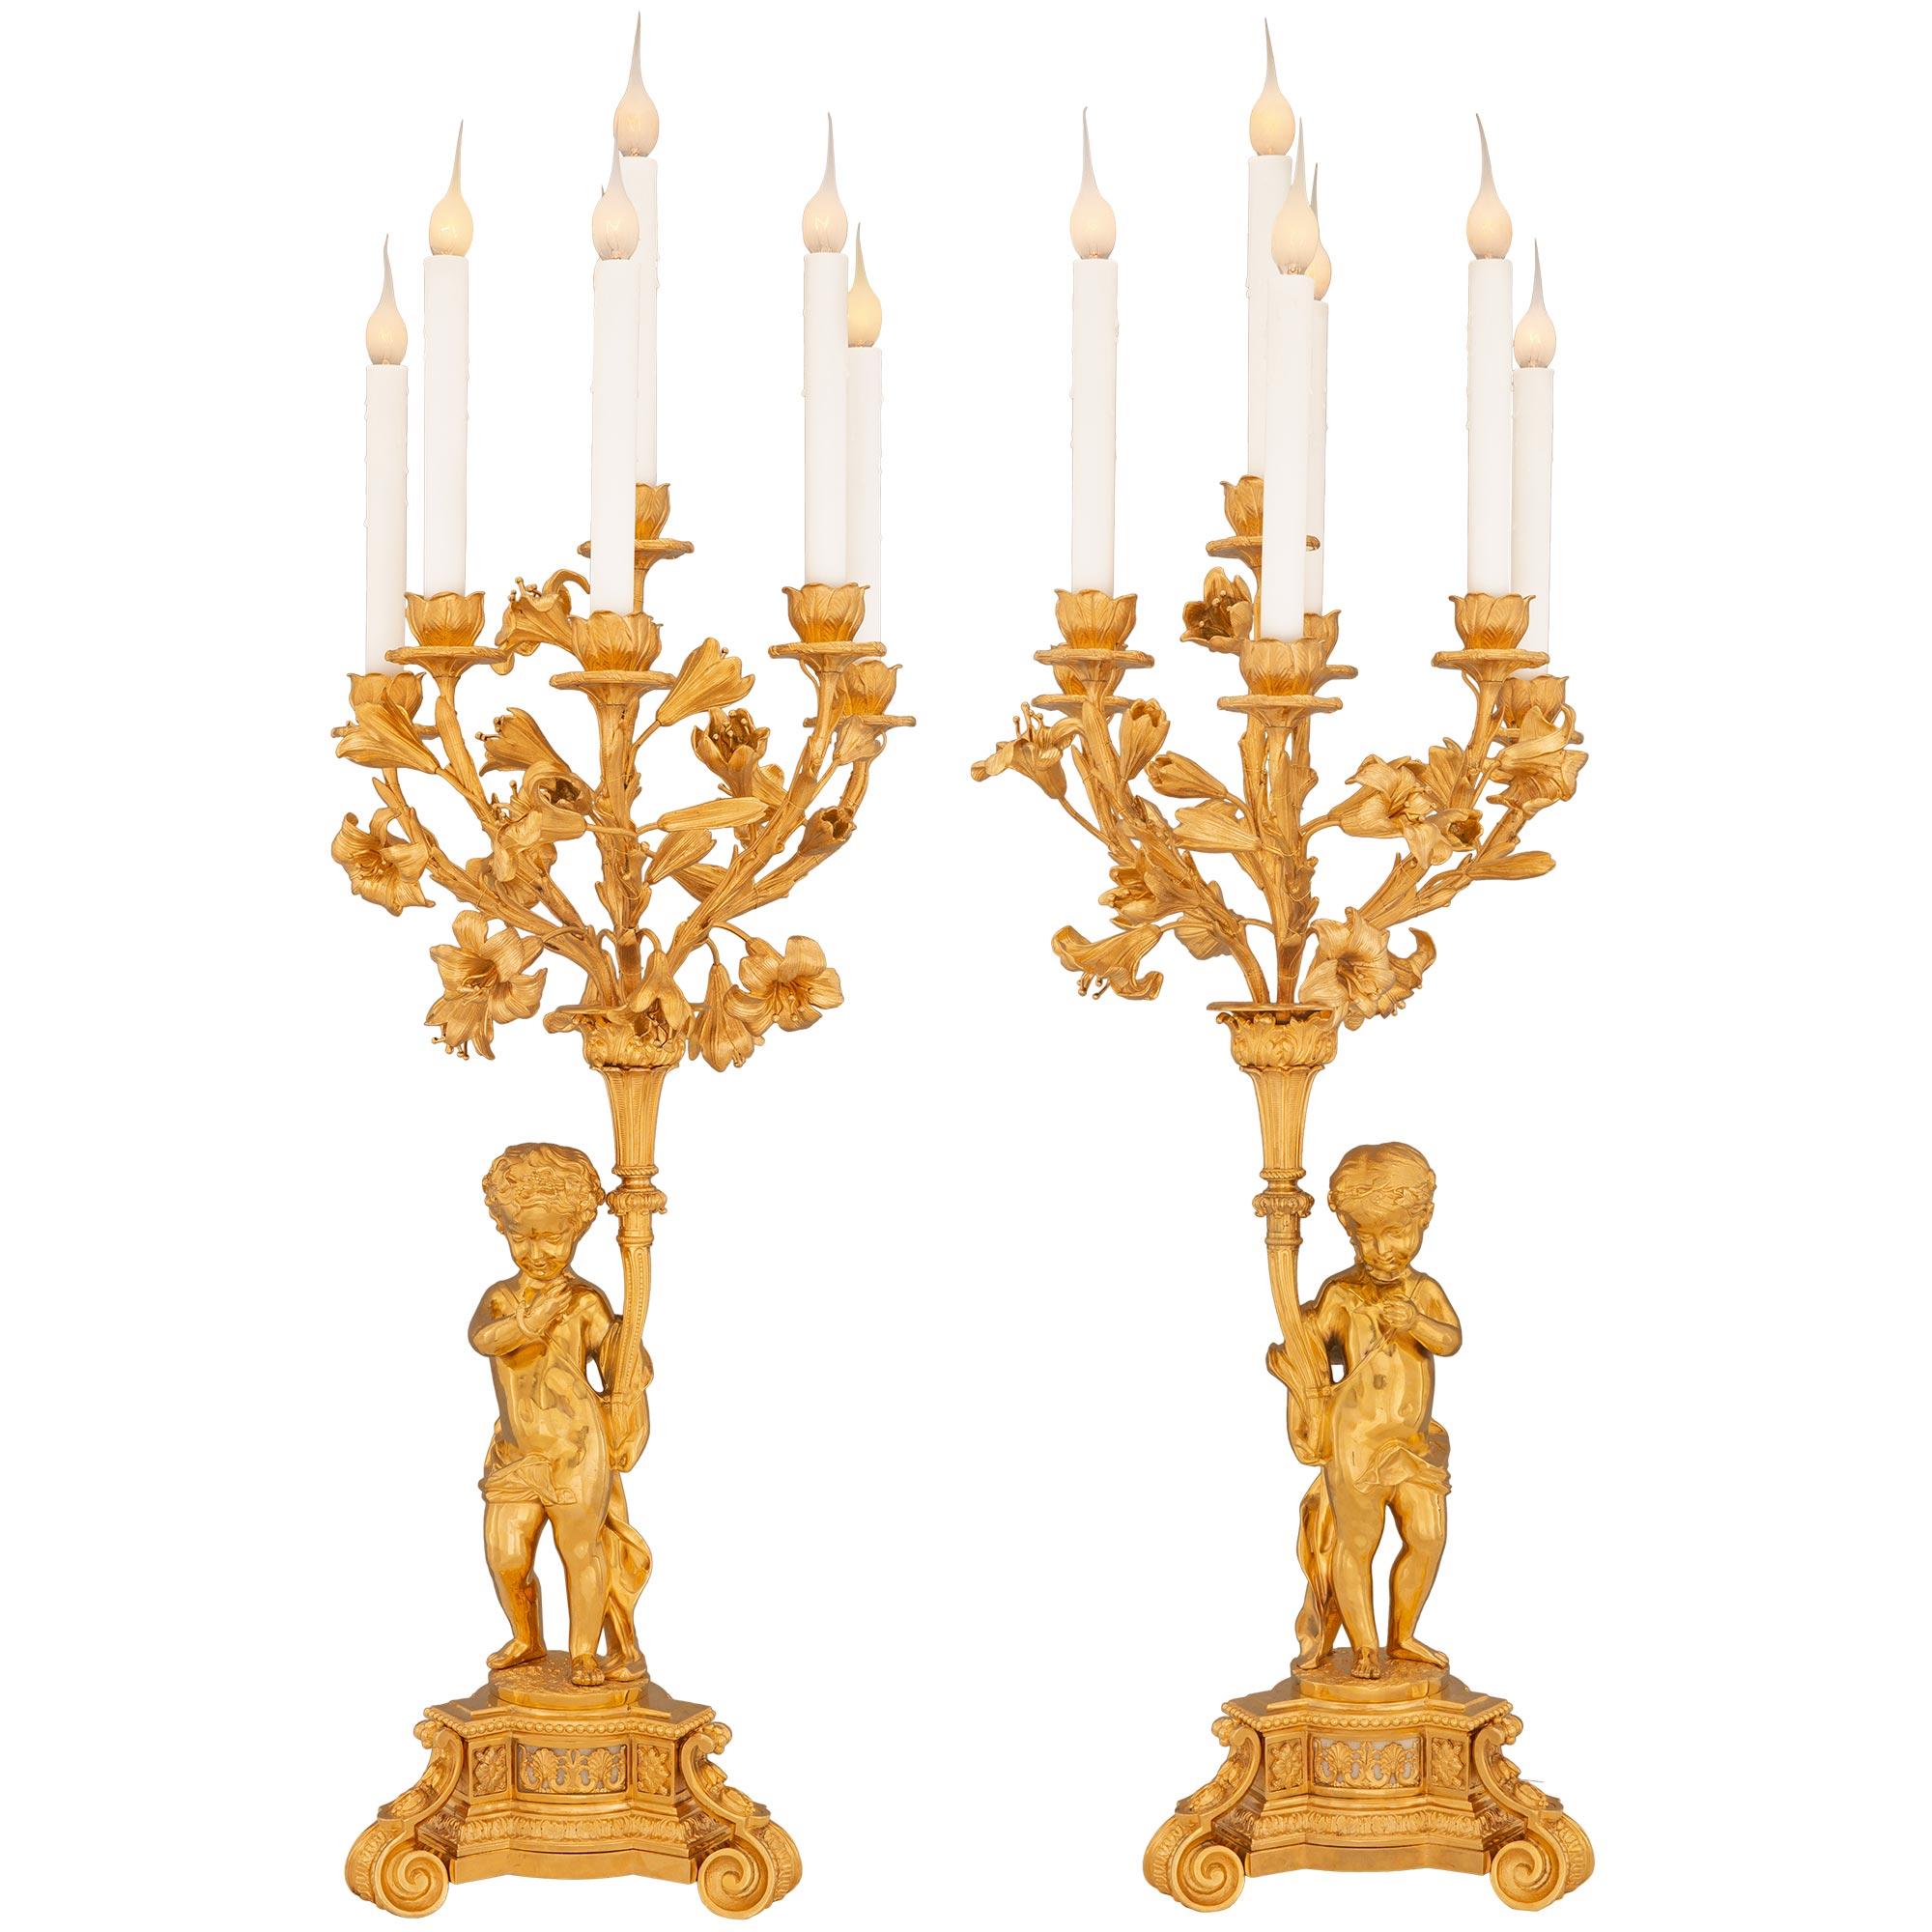 True Pair of French 19th Century Belle Époque Period Ormolu Candelabra Lamps For Sale 5